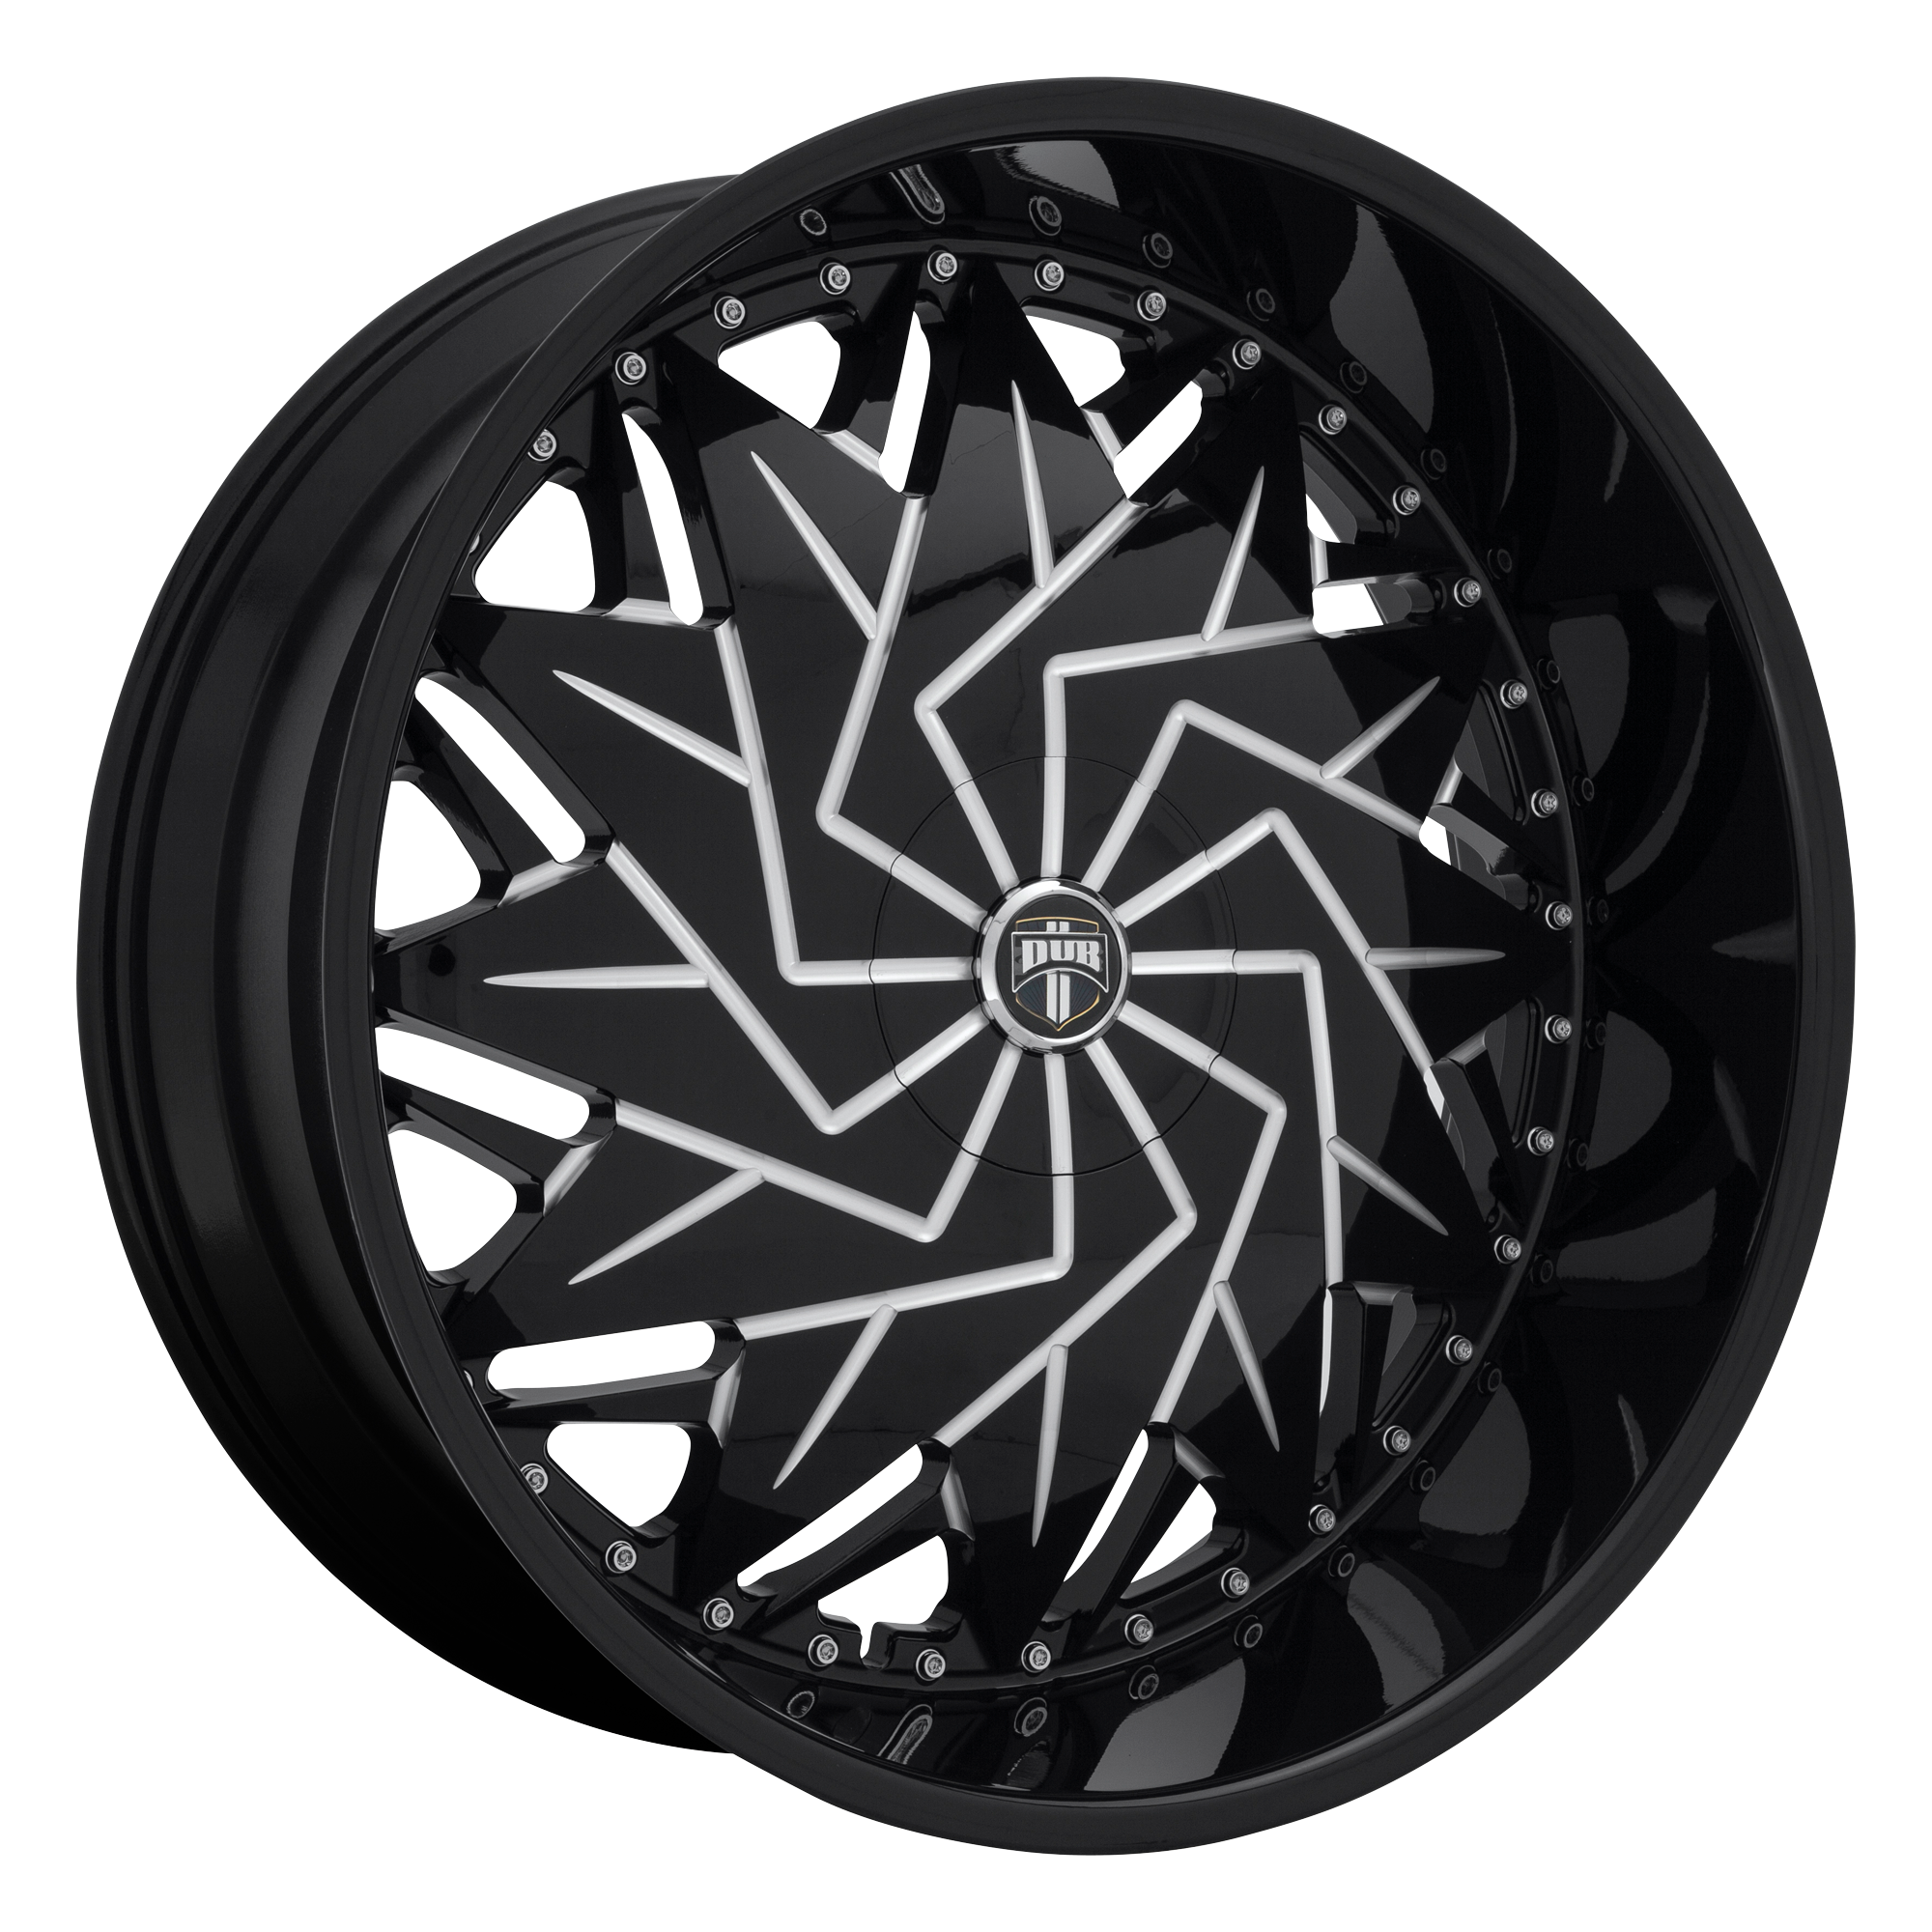 DAZR 26x9 5x114.30/5x120.00 GLOSS BLACK MILLED (25 mm) - Tires and Engine Performance